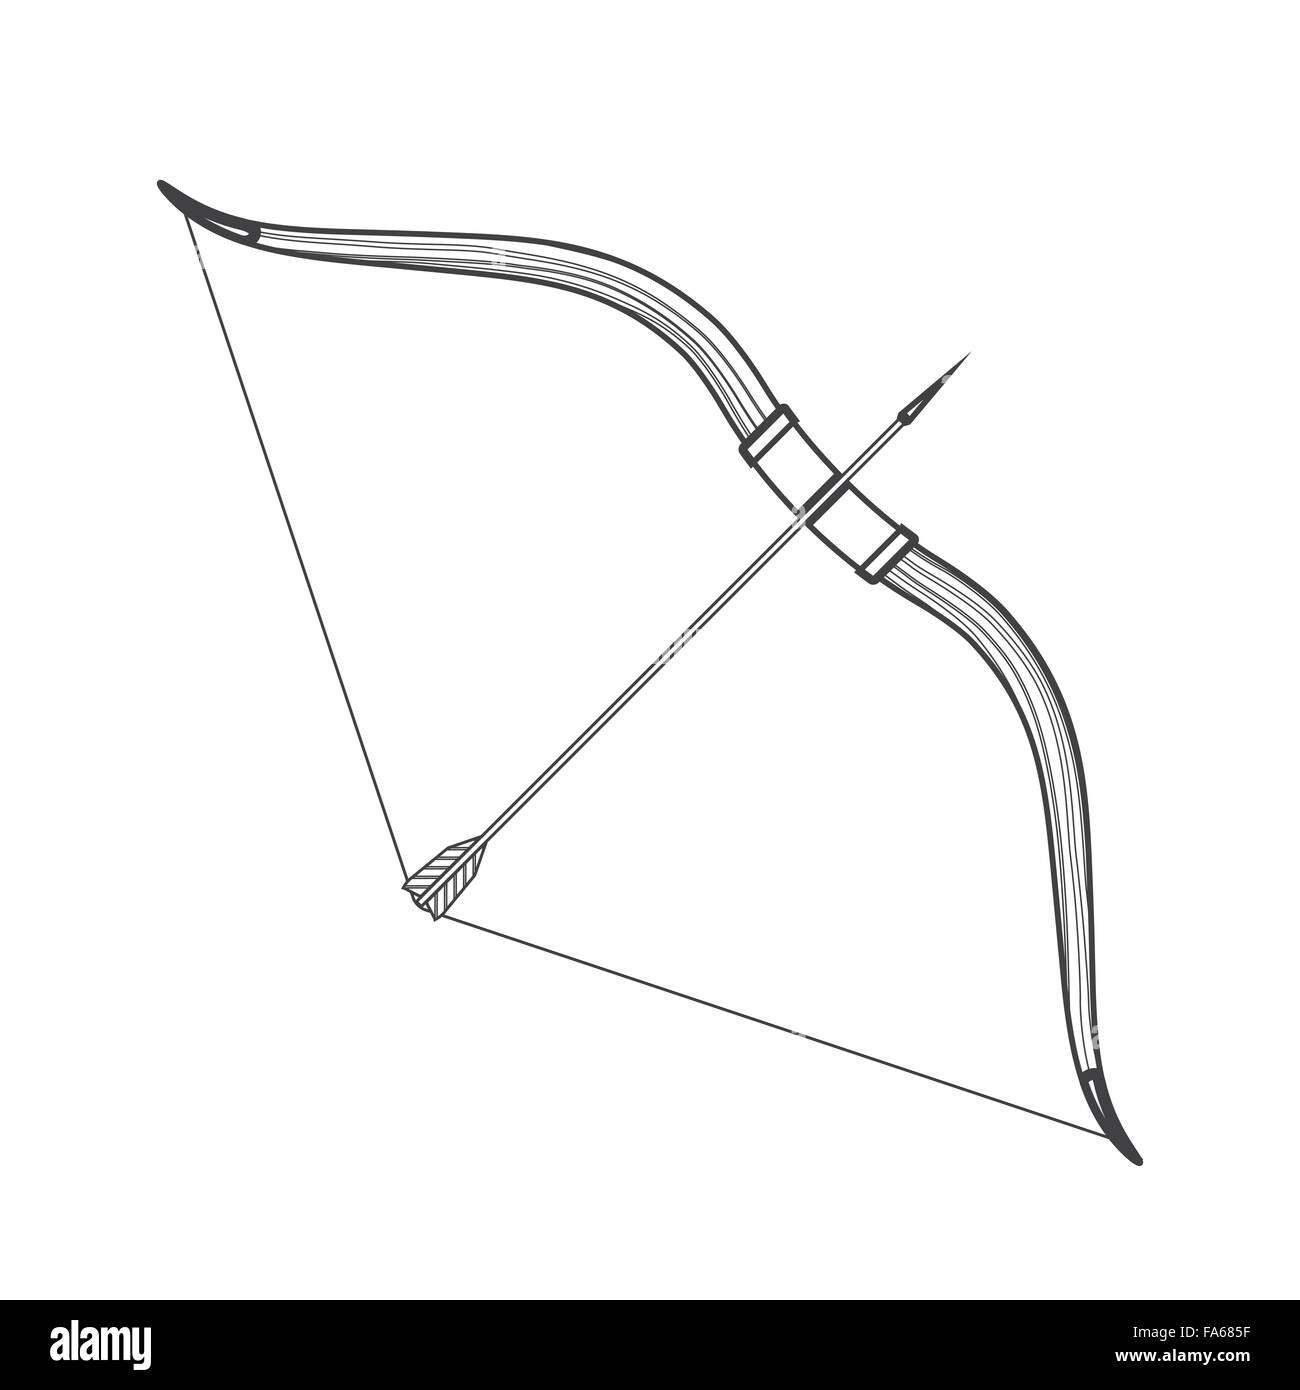 vector monochrome contour medieval wooden bow with arrow isolated black outline illustration on white background Stock Vector